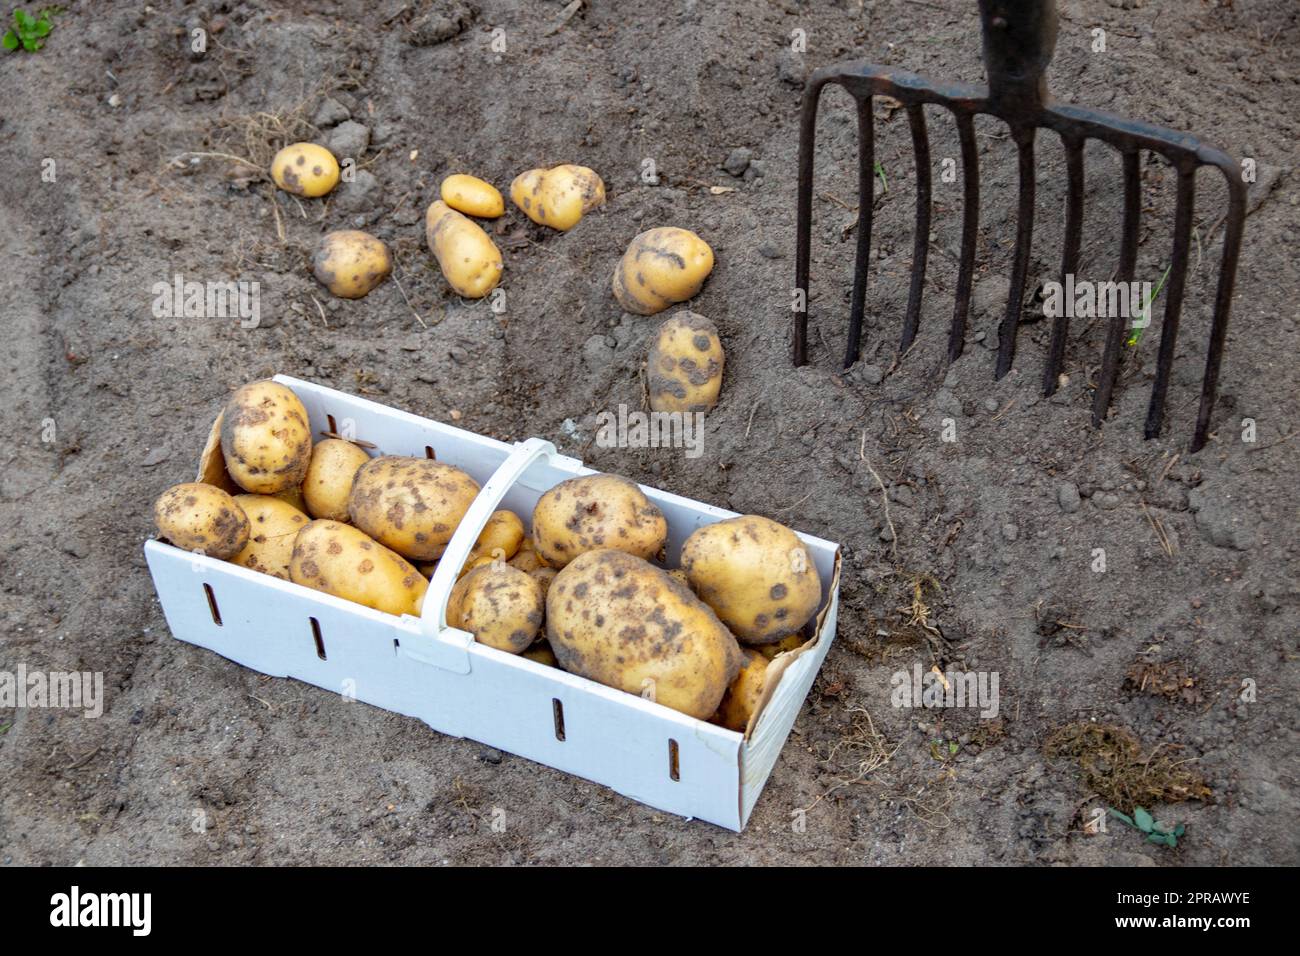 Harvesting potatoes. Fresh organic potatoes are lifted out of the ground with a pitchfork and stored in a basket. Farmer in the garden. Potato harvest from the soil. Stock Photo